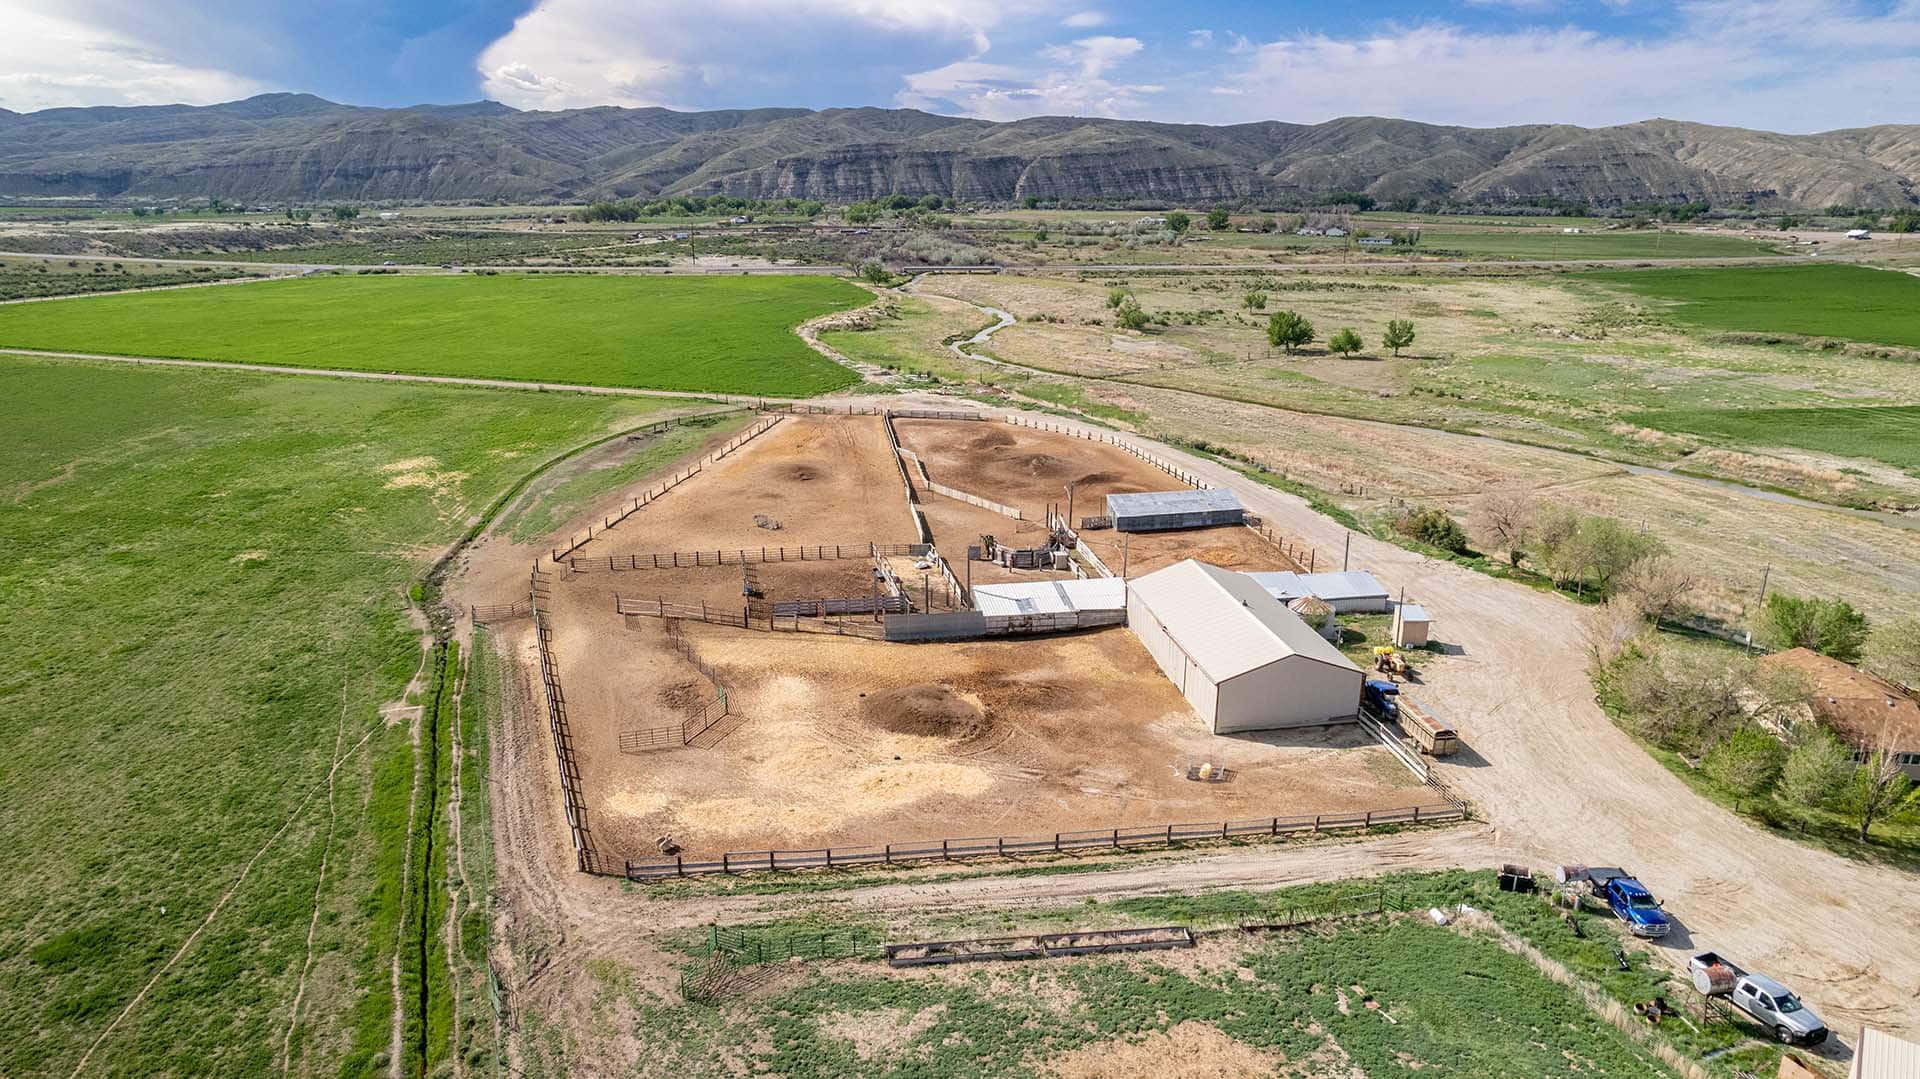 ranch for sale wyoming butterfield farm and livestock